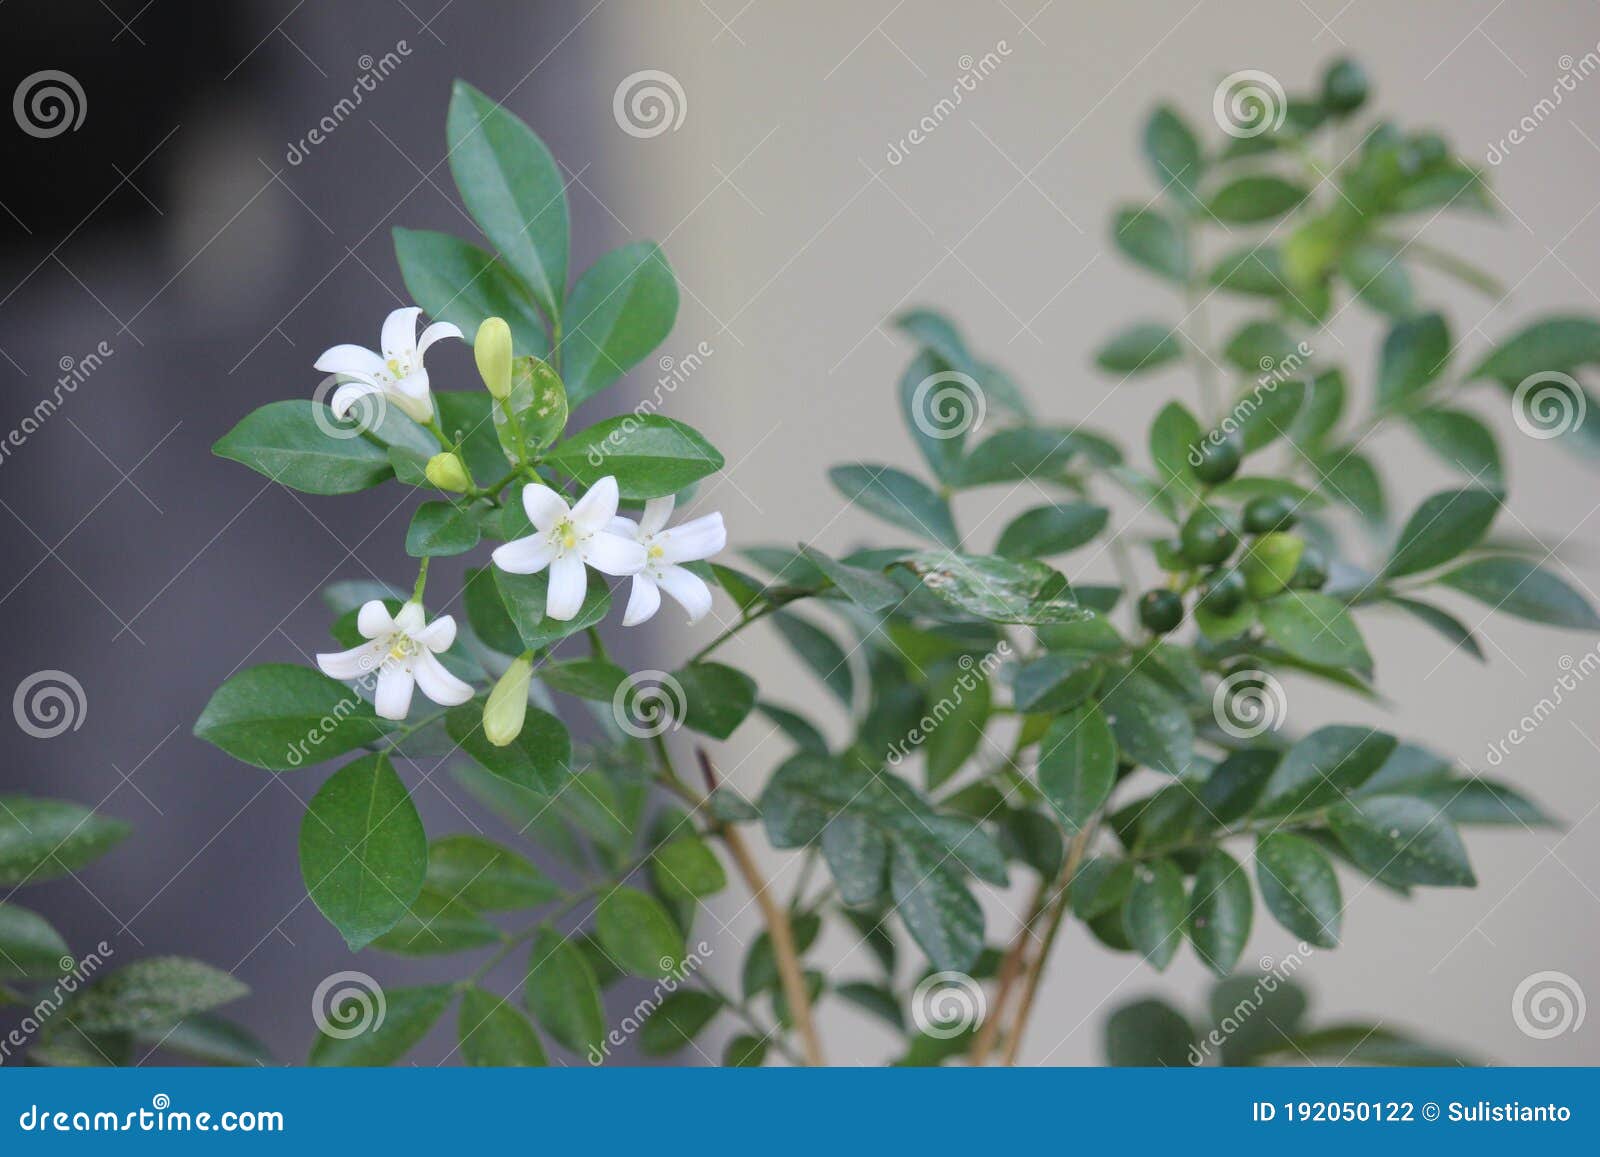 White Murraya Paniculata Flower Leaves In A National Park Stock Photo Image Of Branch Outdoor 192050122